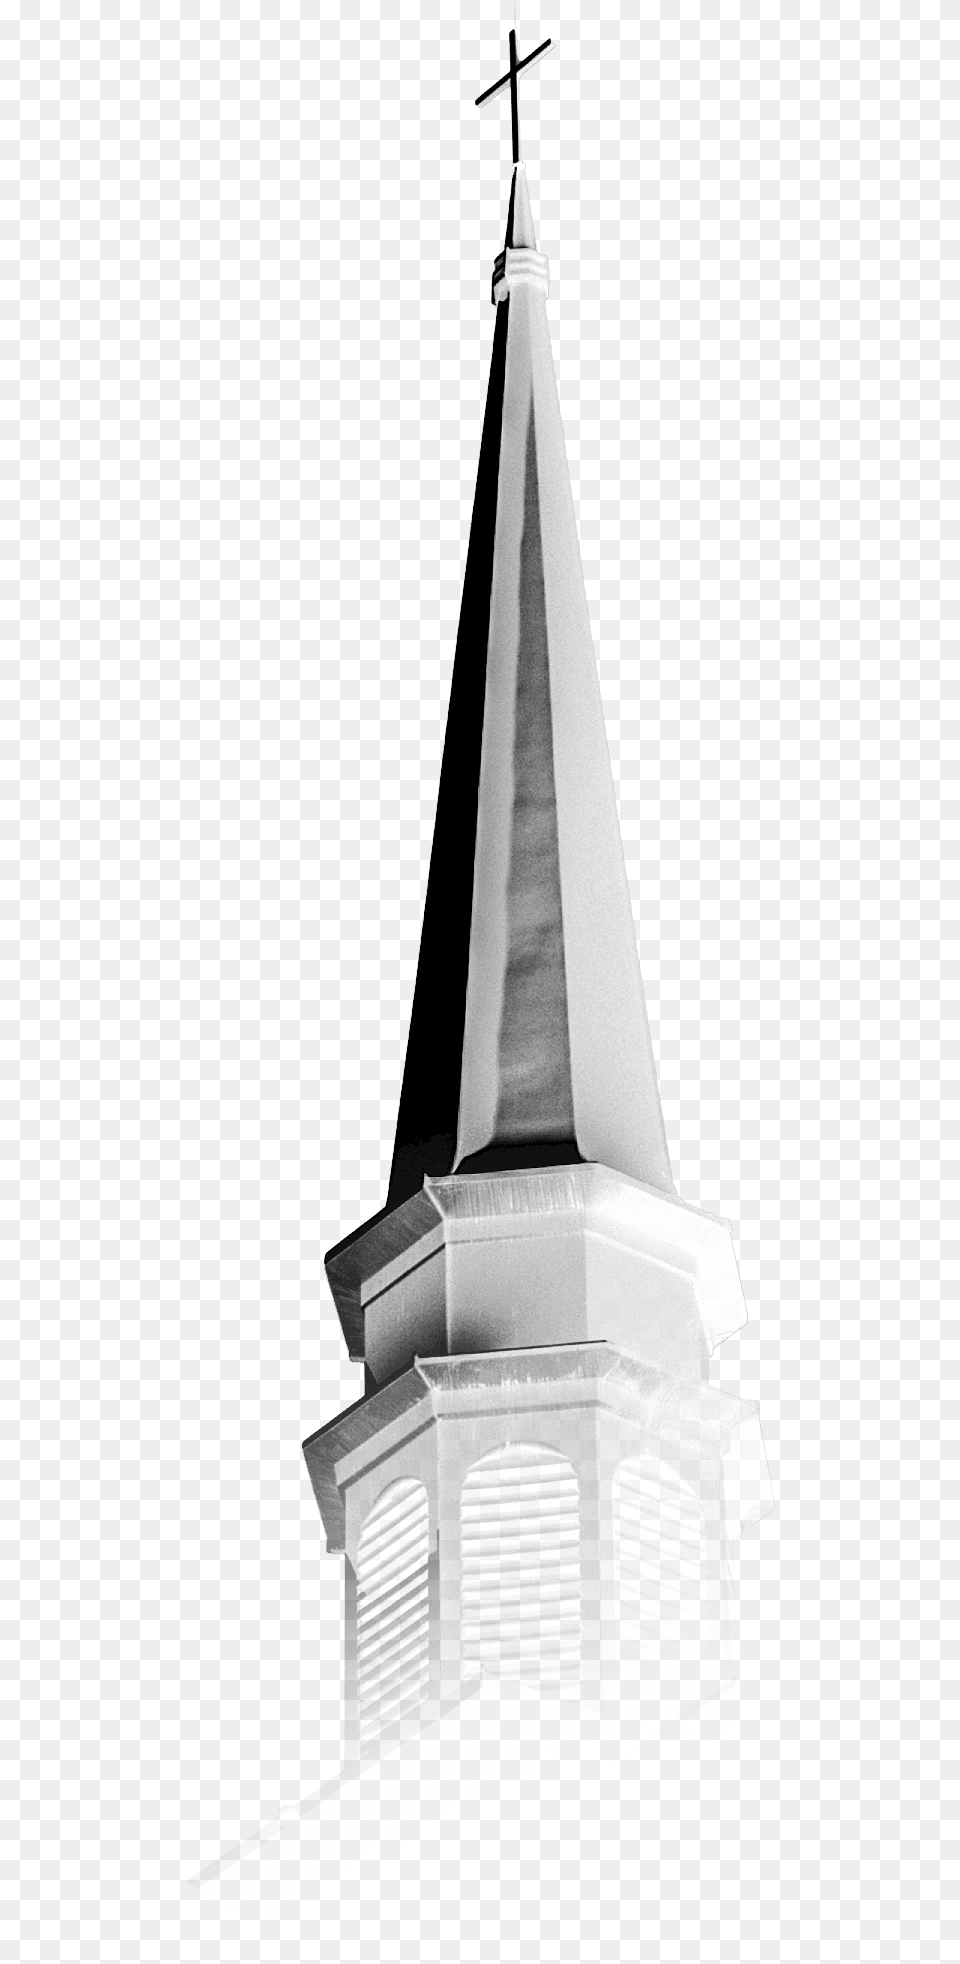 Spire 2016, Architecture, Building, Cross, Symbol Png